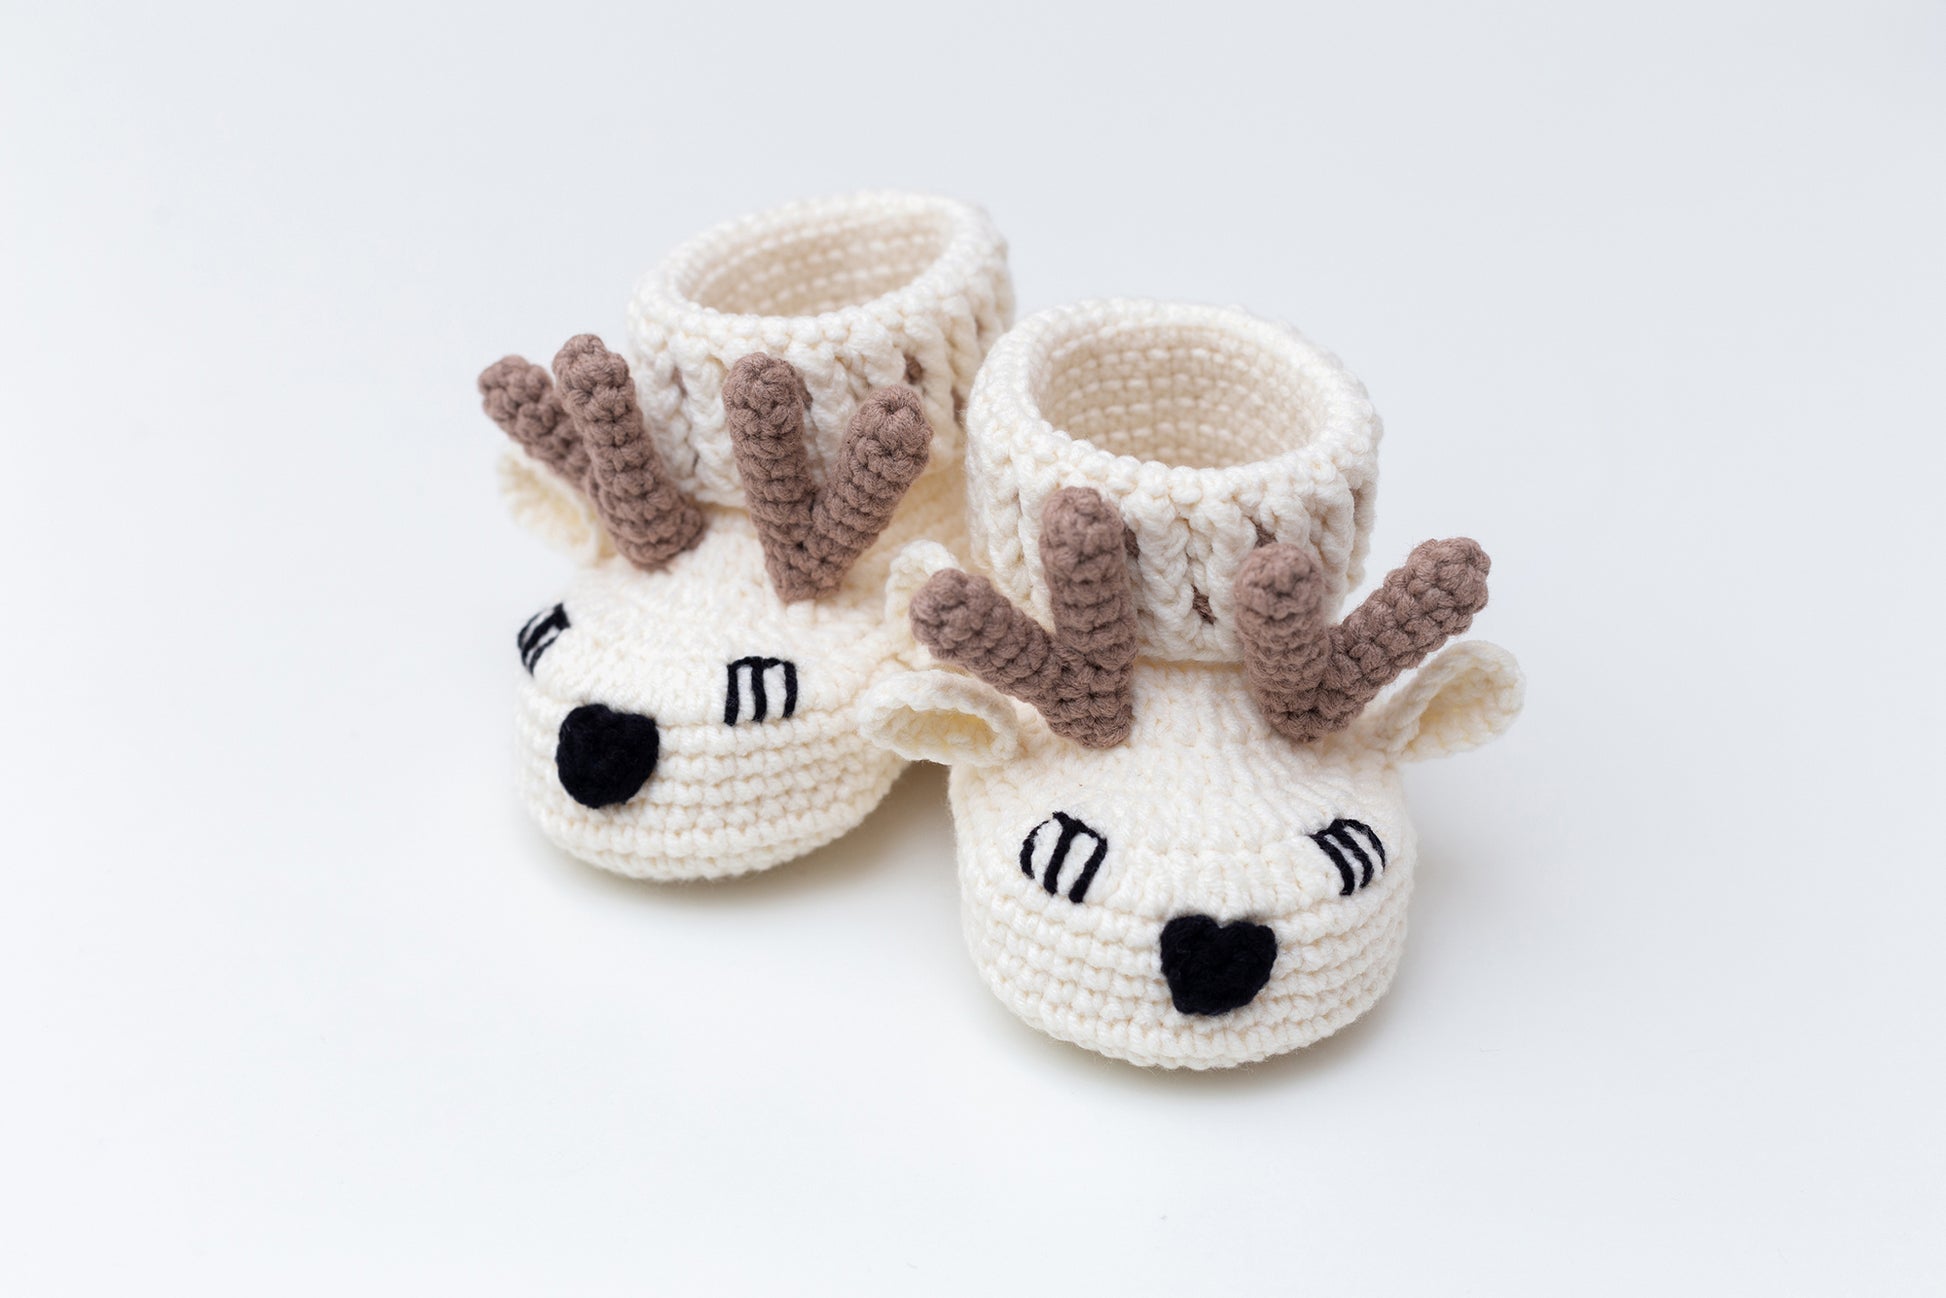 Holideer Fuzzy Baby Sweater Dress - Vancouver's Best Baby & Kids Store:  Unique Gifts, Toys, Clothing, Shoes, Boots, Baby Shower Gifts.